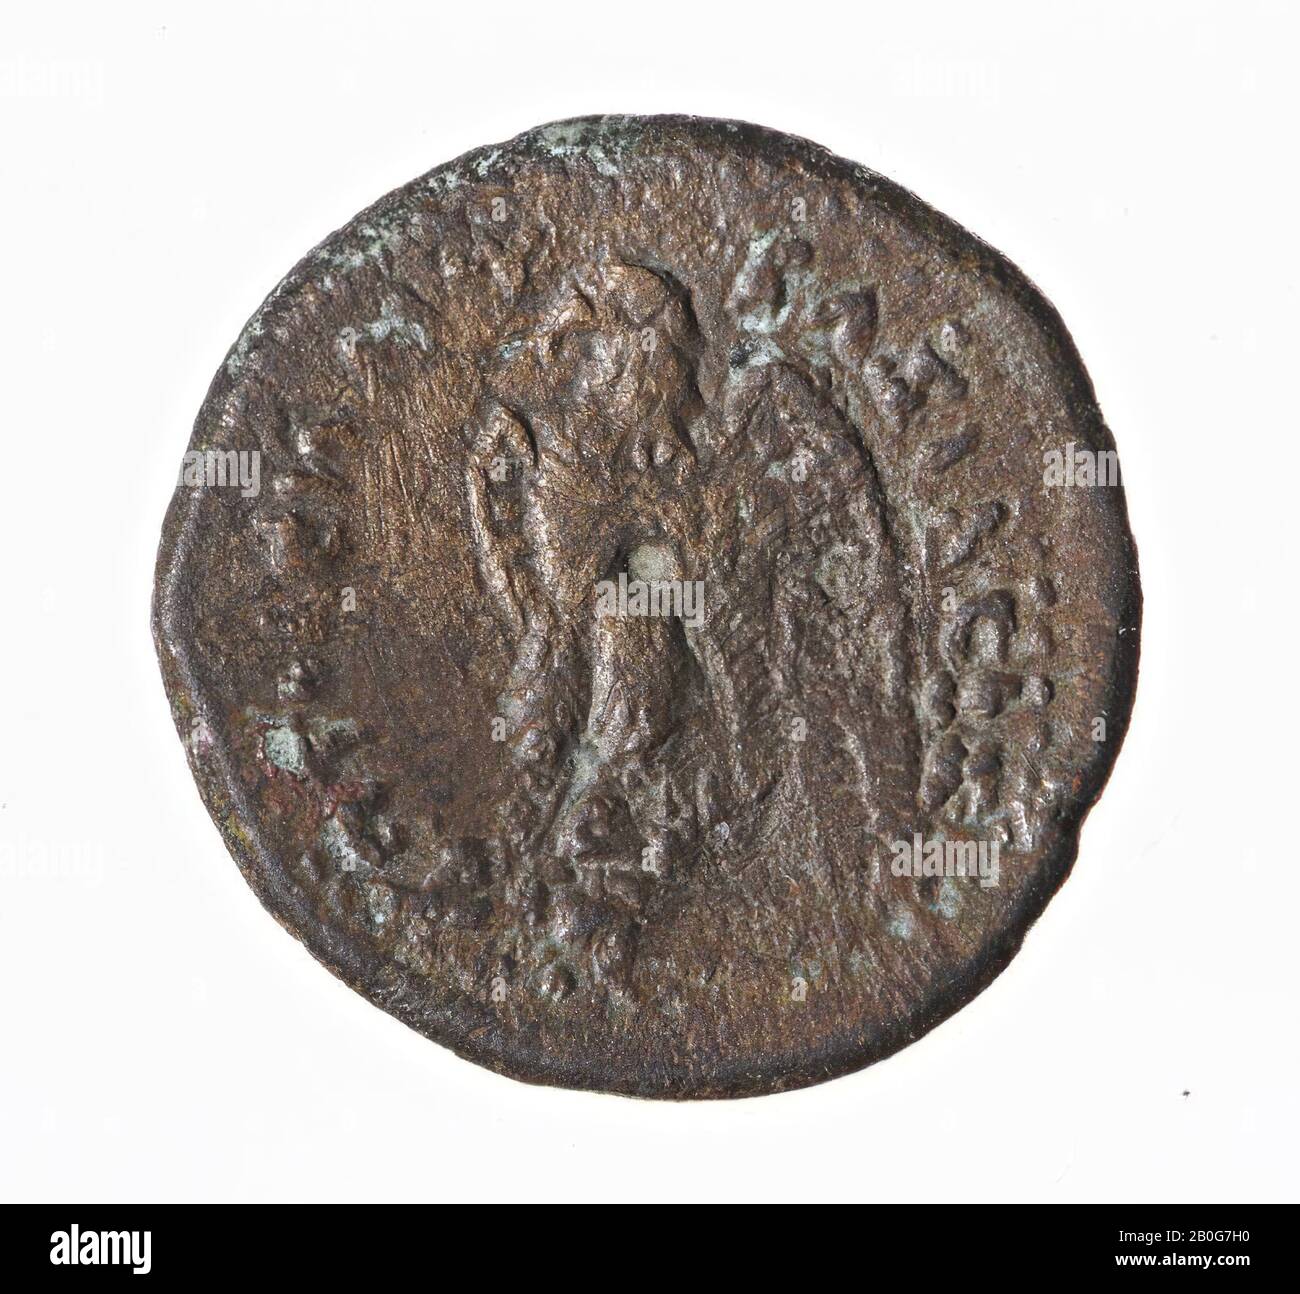 coin, aes-20, Ptolemy II, Vz: Head of Alexander the Great r., Kz: eagle on lightning l., Between legs delta, PTOLEMAIOU BASILEOOS, coin, aes-20, Ptolemy II, metal, copper , Diam. 20 mm, wt. 7,19 gr, Greco-Roman Period, Ptolemaeën BC 285-246, Egypt Stock Photo